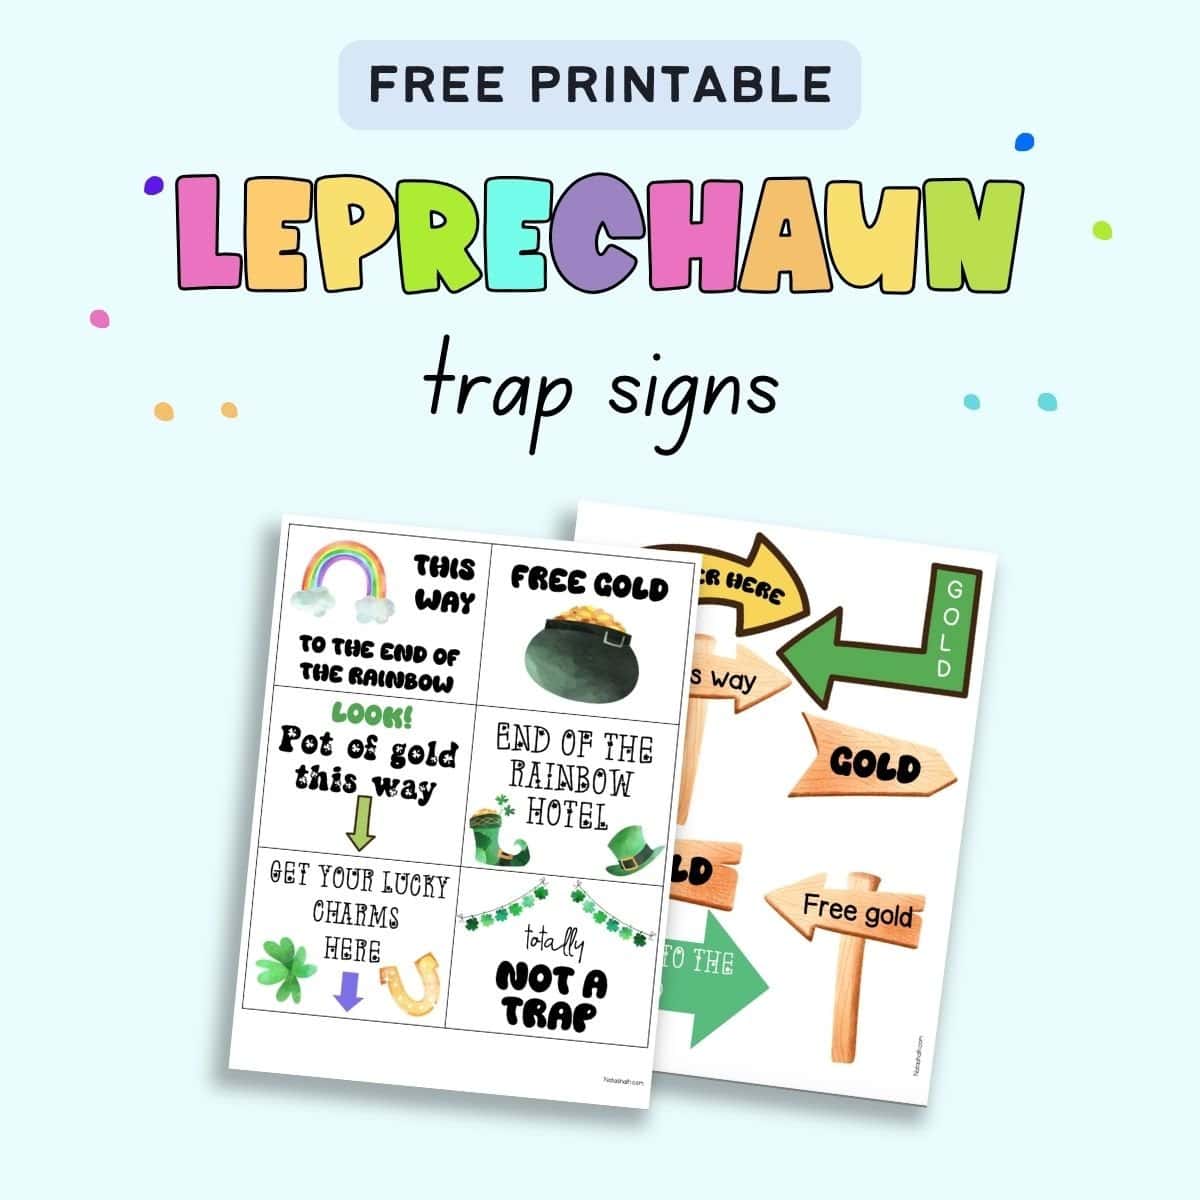 Text "free printable leprechaun trap signs" with a preview of two pages of printable leprechaun trap signs